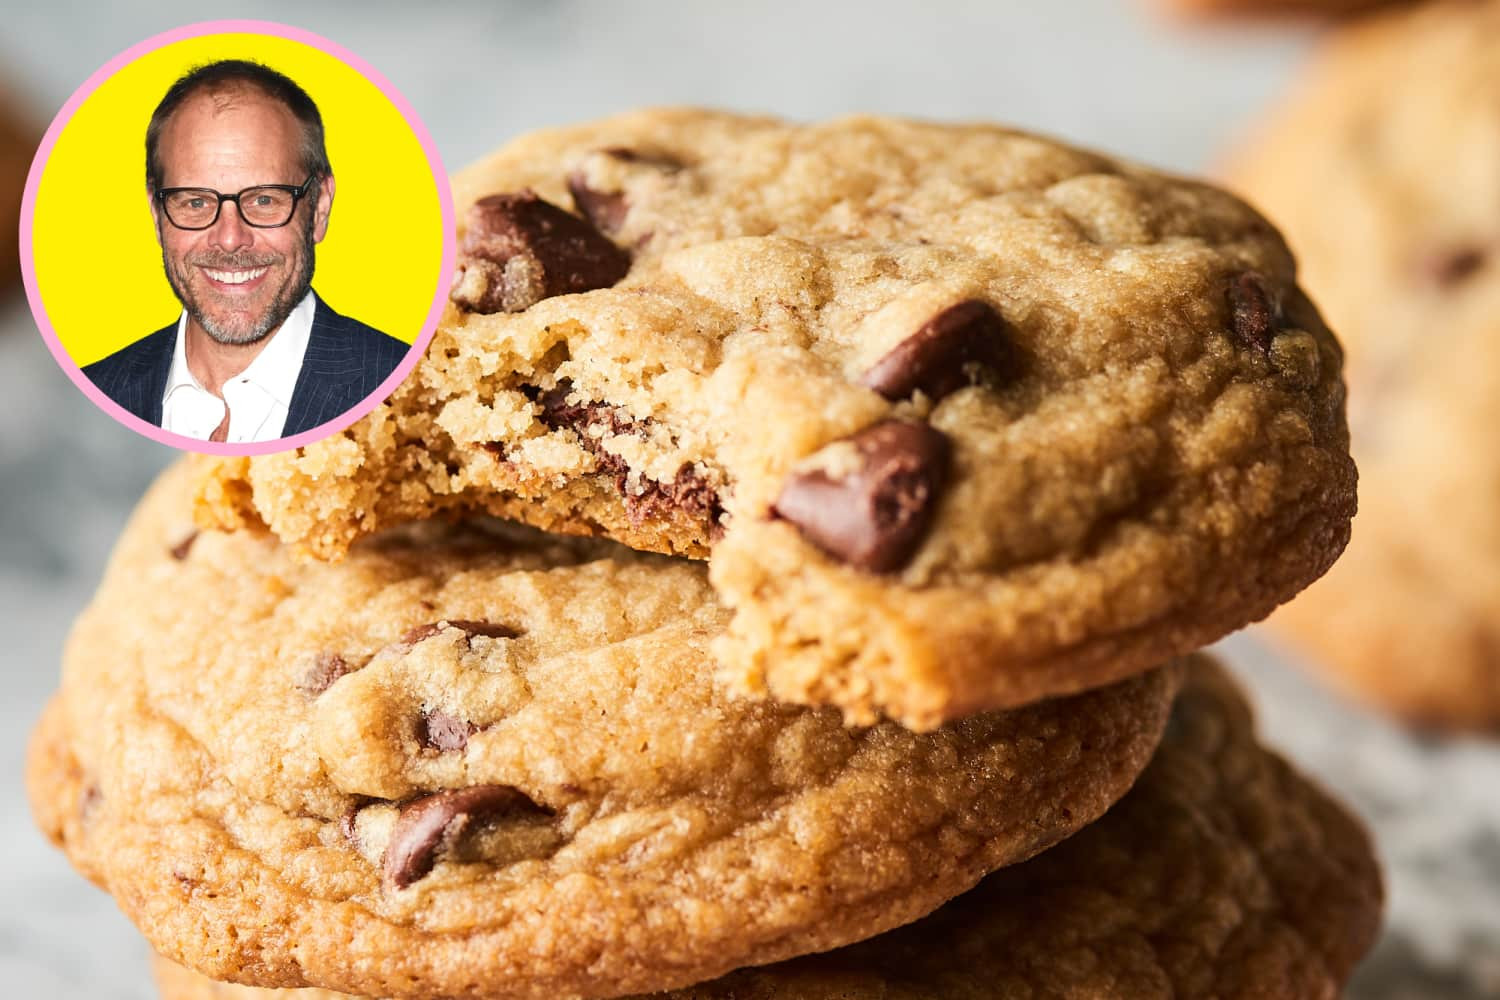 Chocolate Chip Cookies Alton Brown Luxury Alton Brown’s Secret for A Perfectly Chewy Chocolate Chip